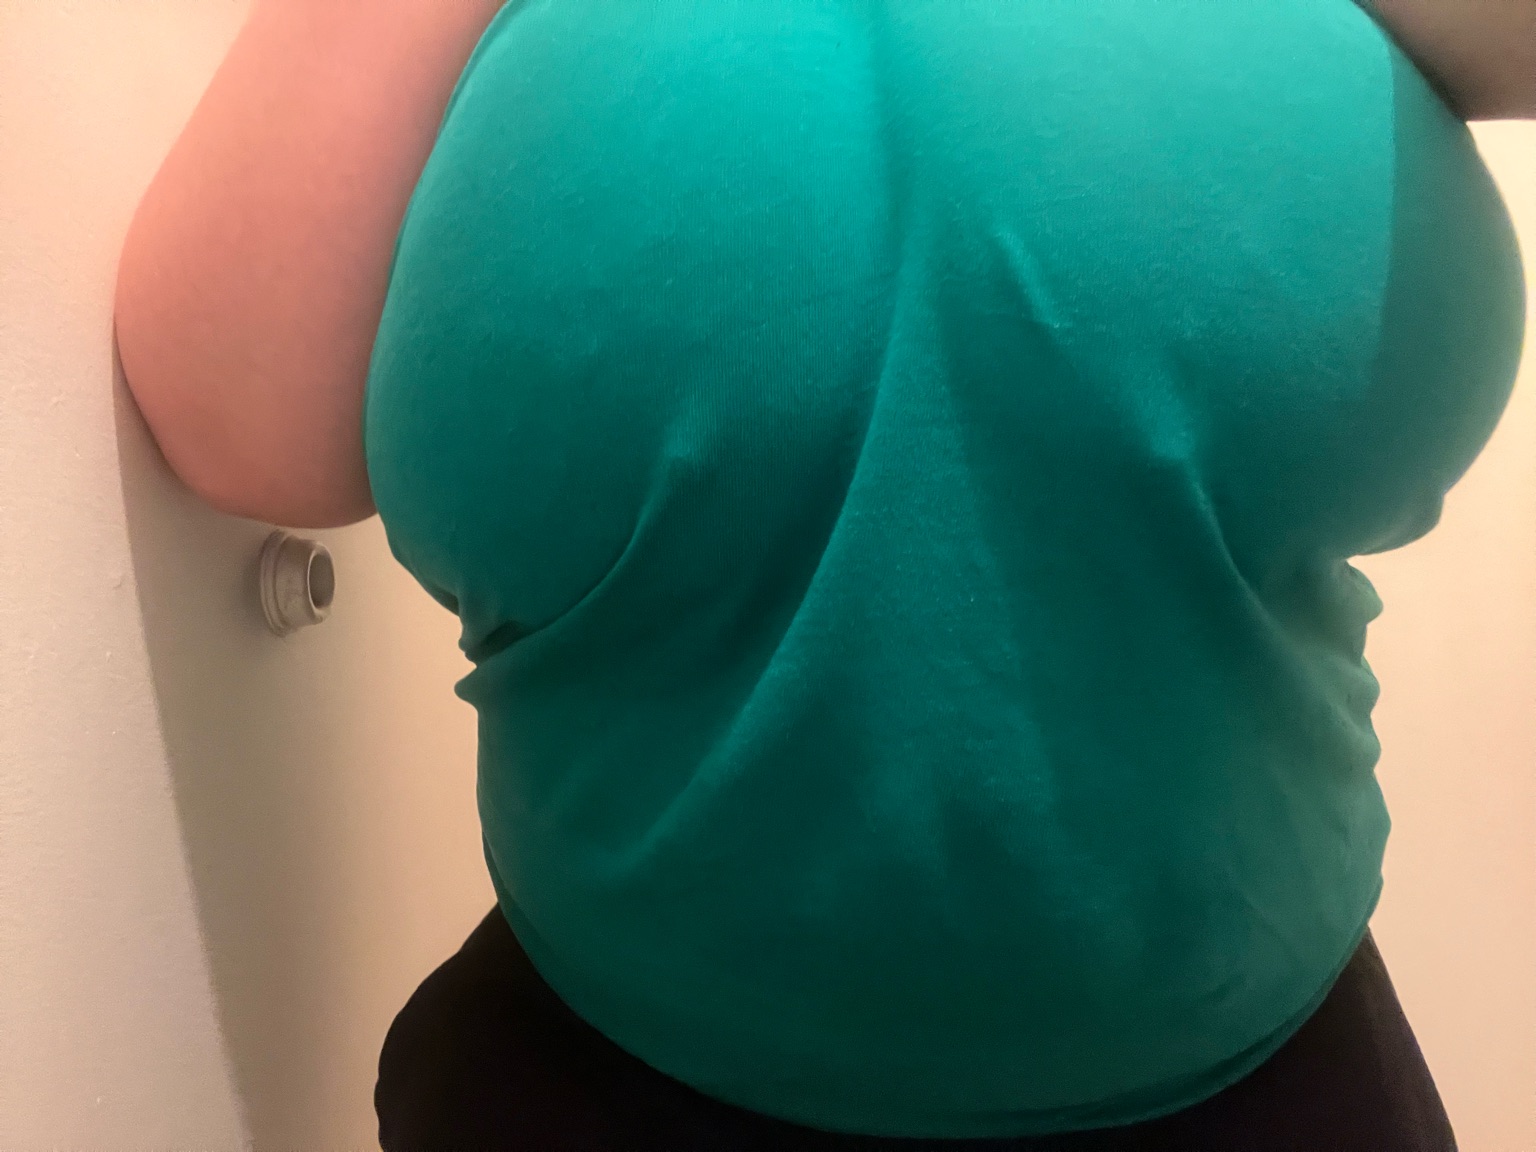 Big Busty Amateur from NY